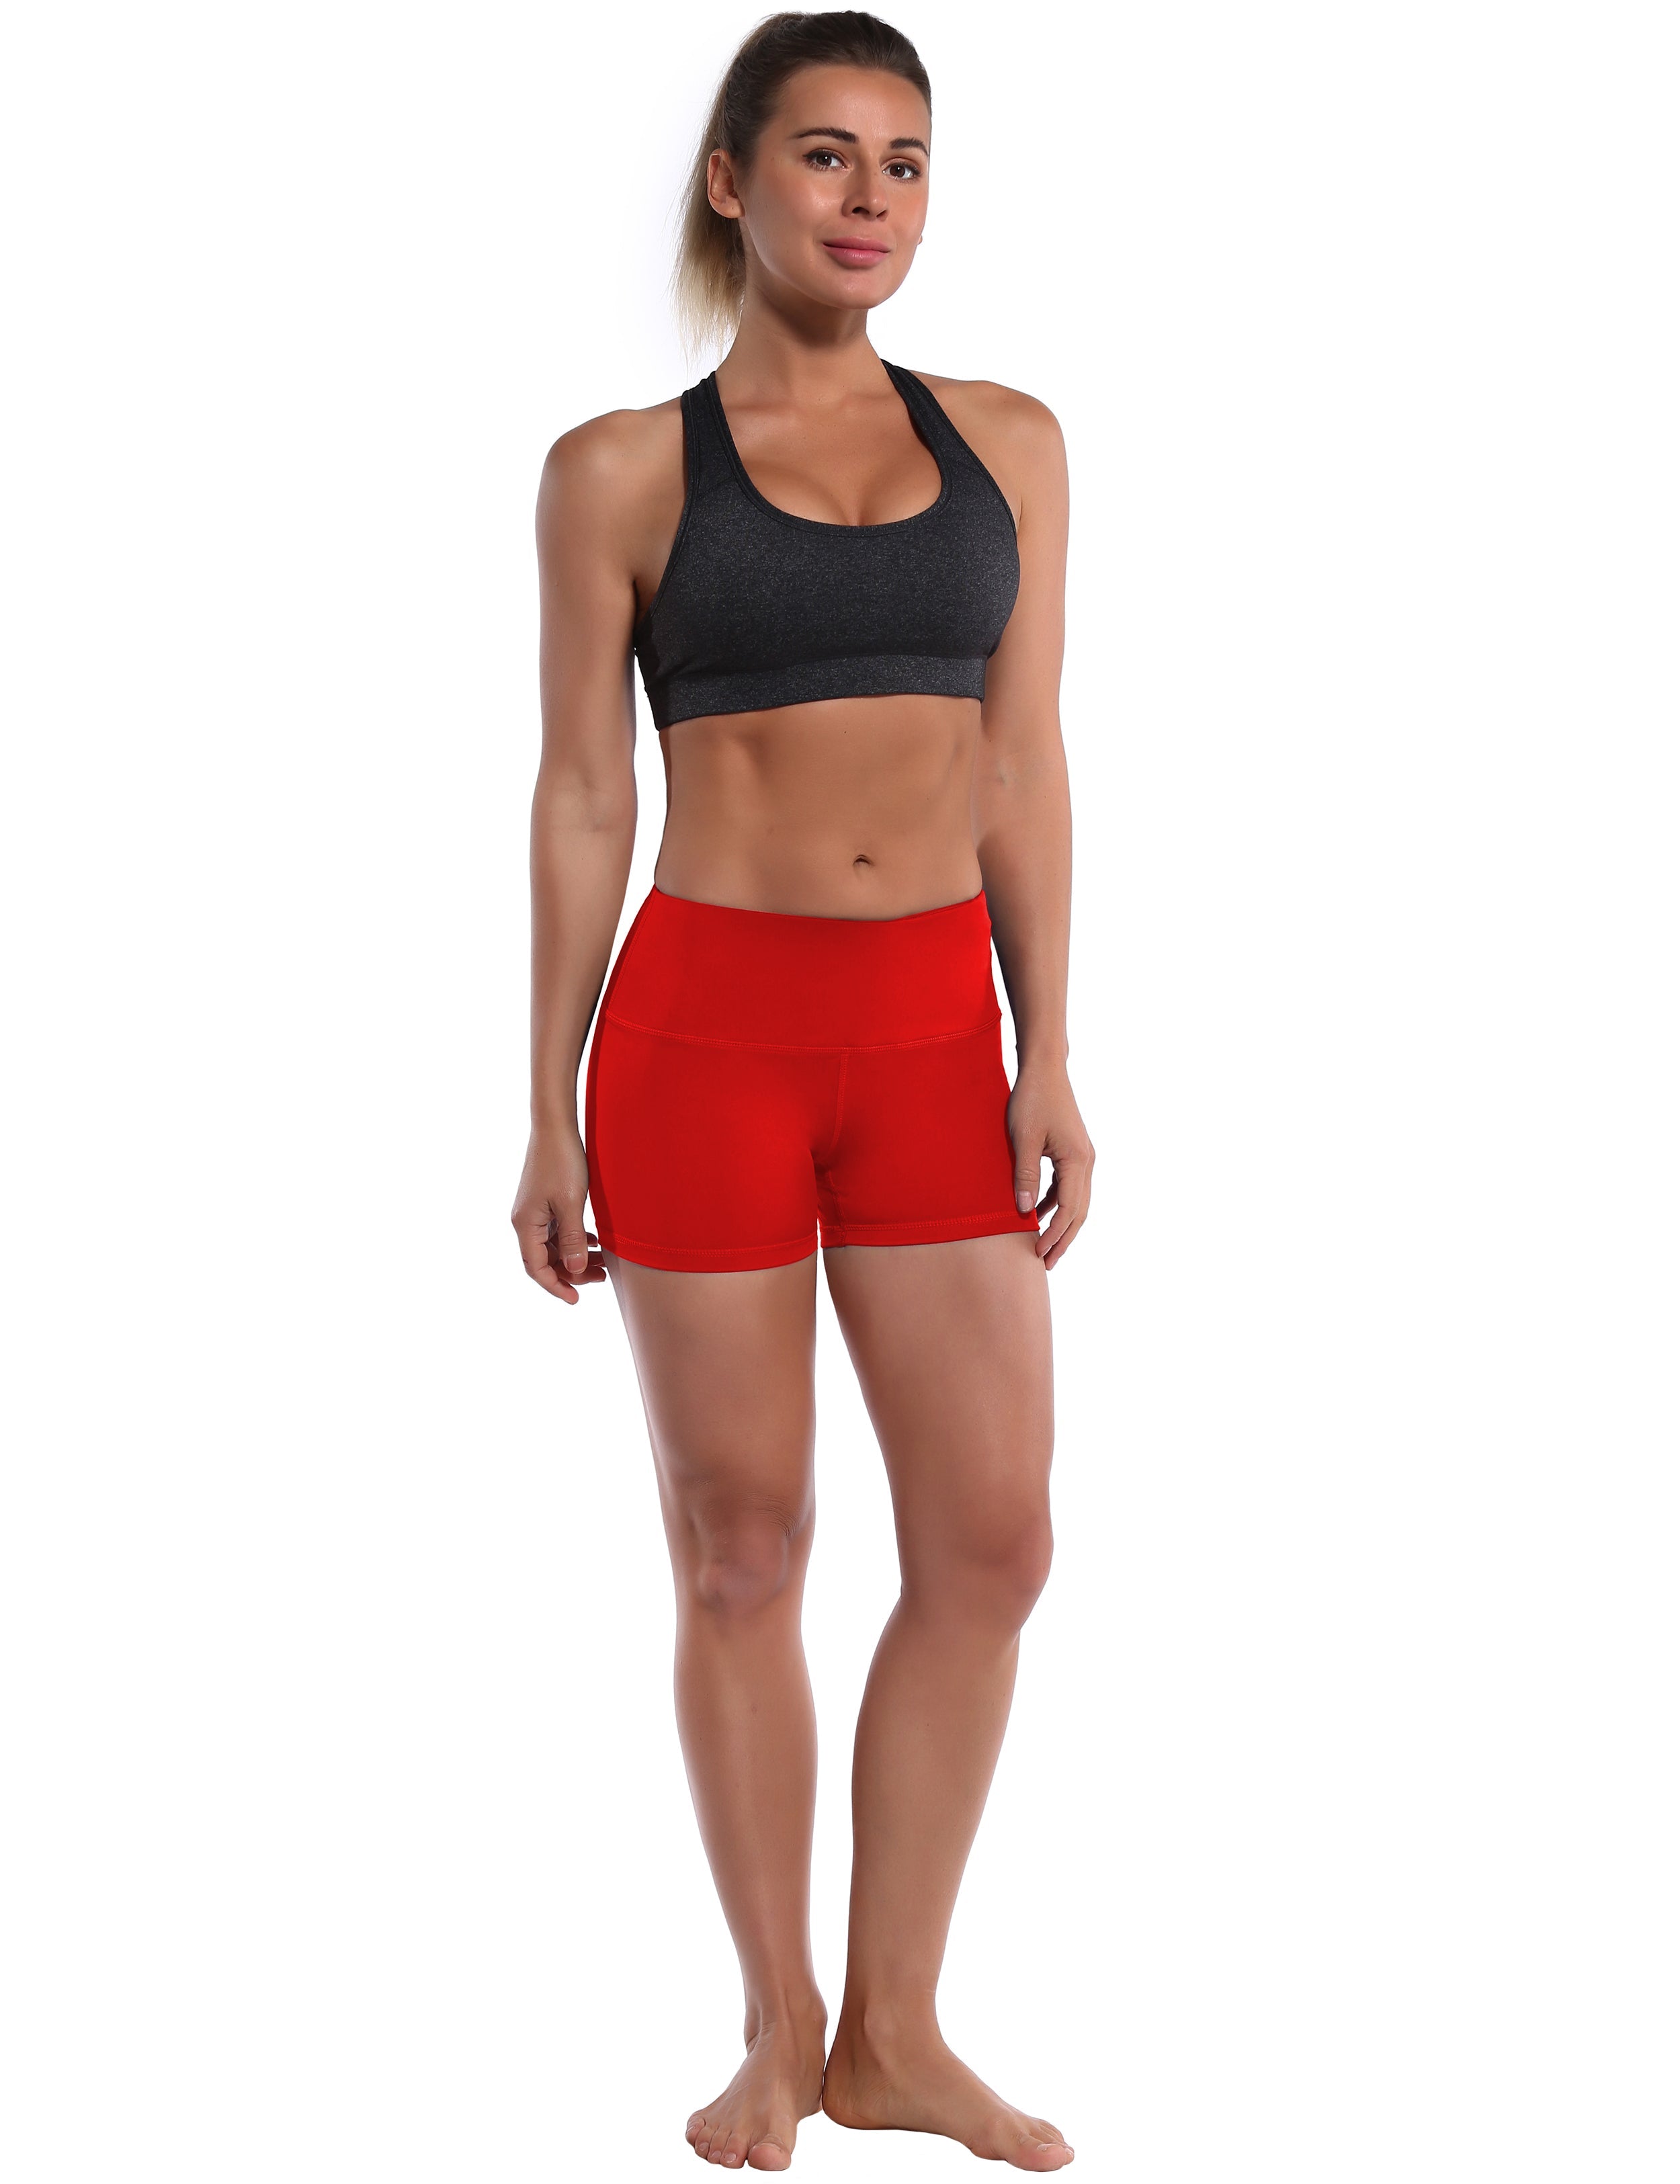 2.5" Pilates Shorts scarlet Softest-ever fabric High elasticity High density 4-way stretch Fabric doesn't attract lint easily No see-through Moisture-wicking Machine wash 75% Nylon, 25% Spandex